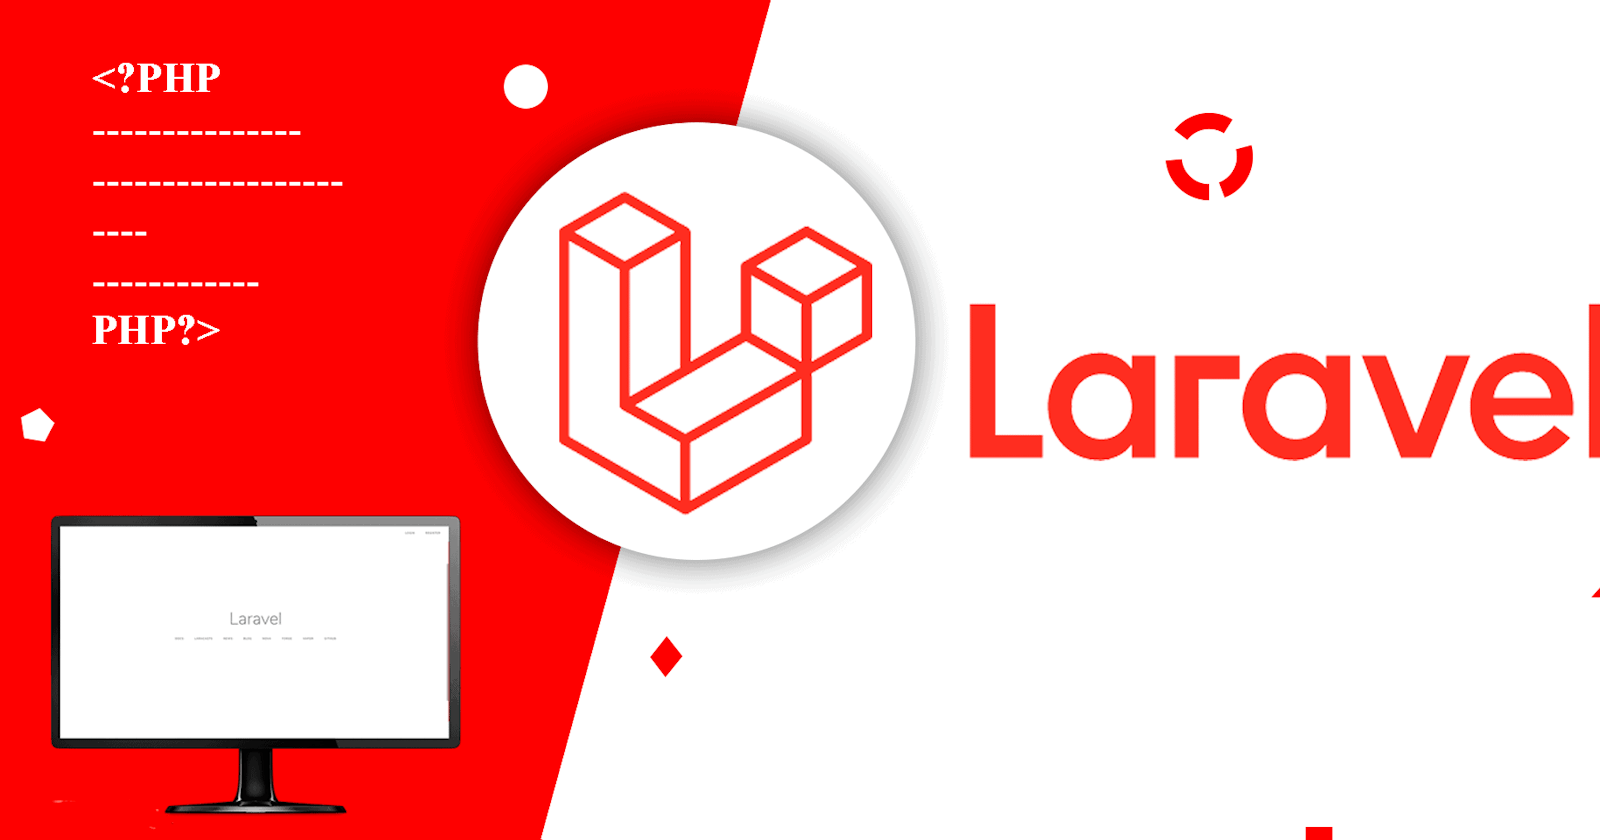 What does the future hold for Laravel